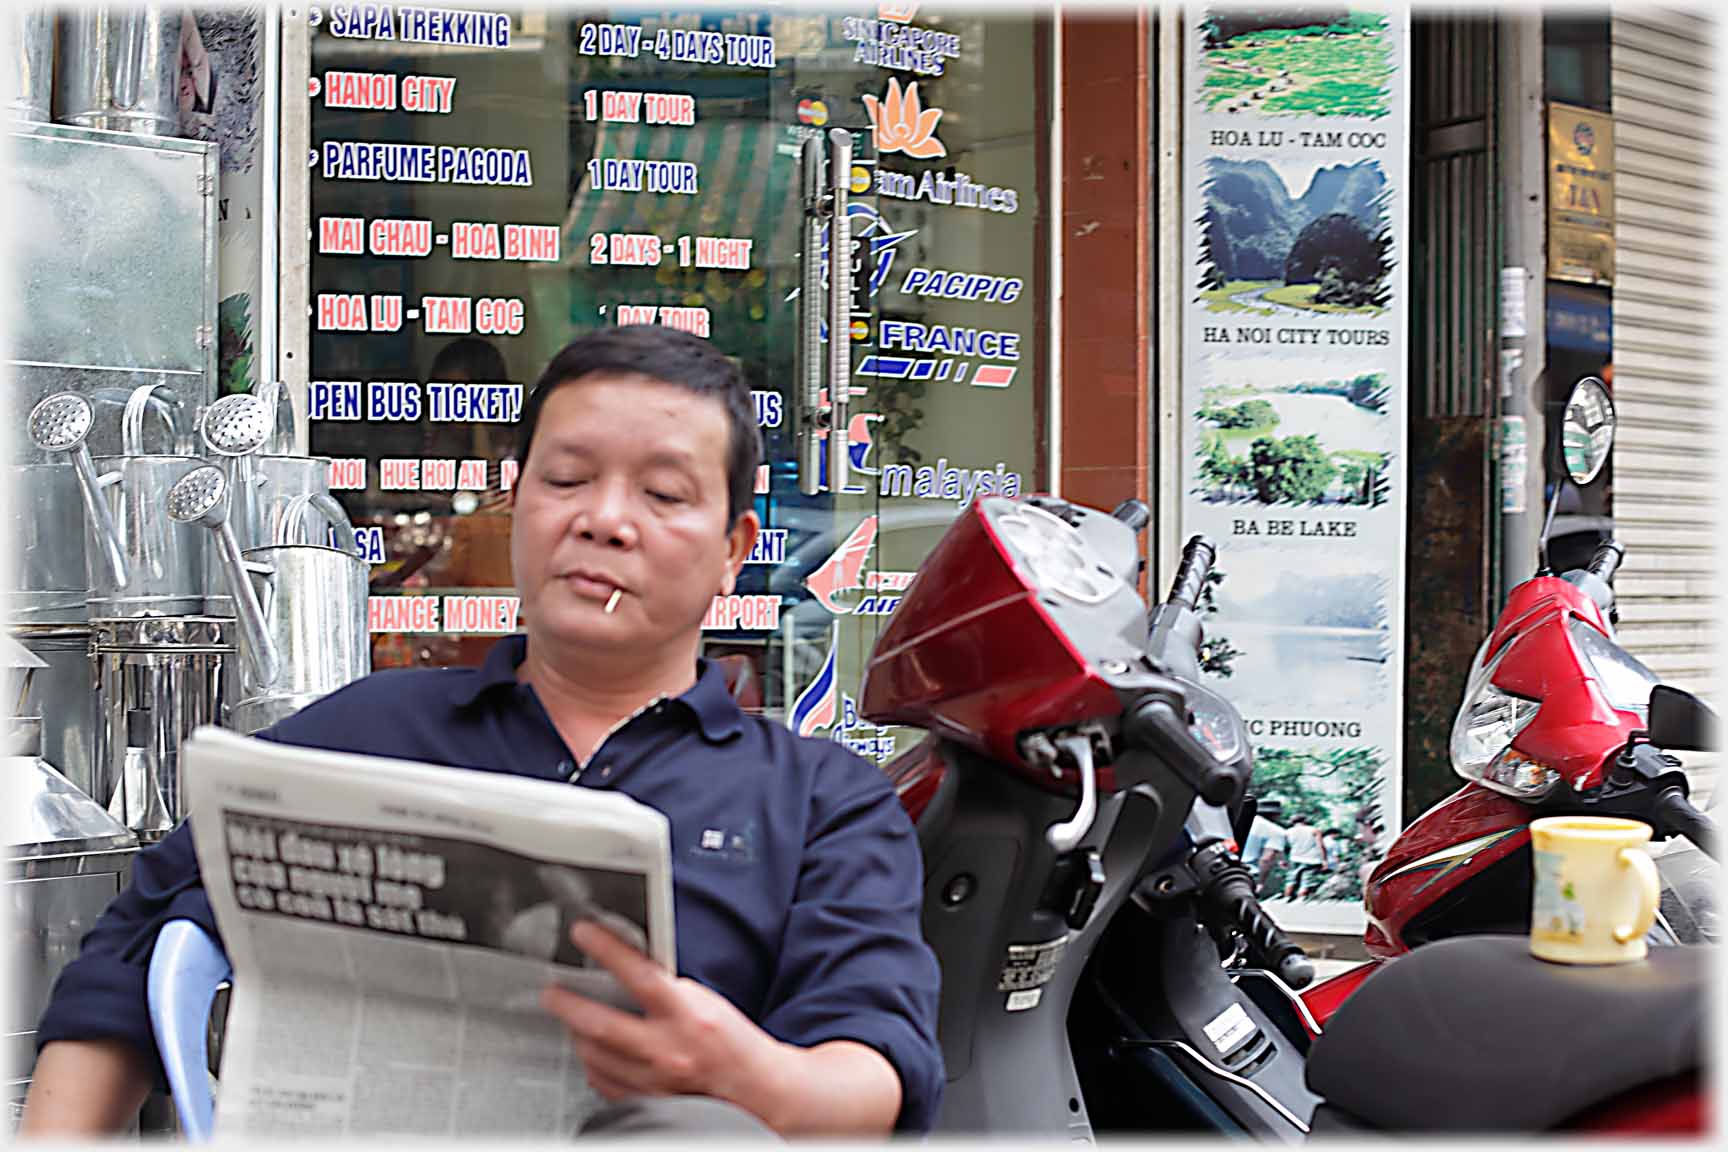 Man with contented expression toothpick in mouth reading a newspaper next to a motorbike with mug on it.